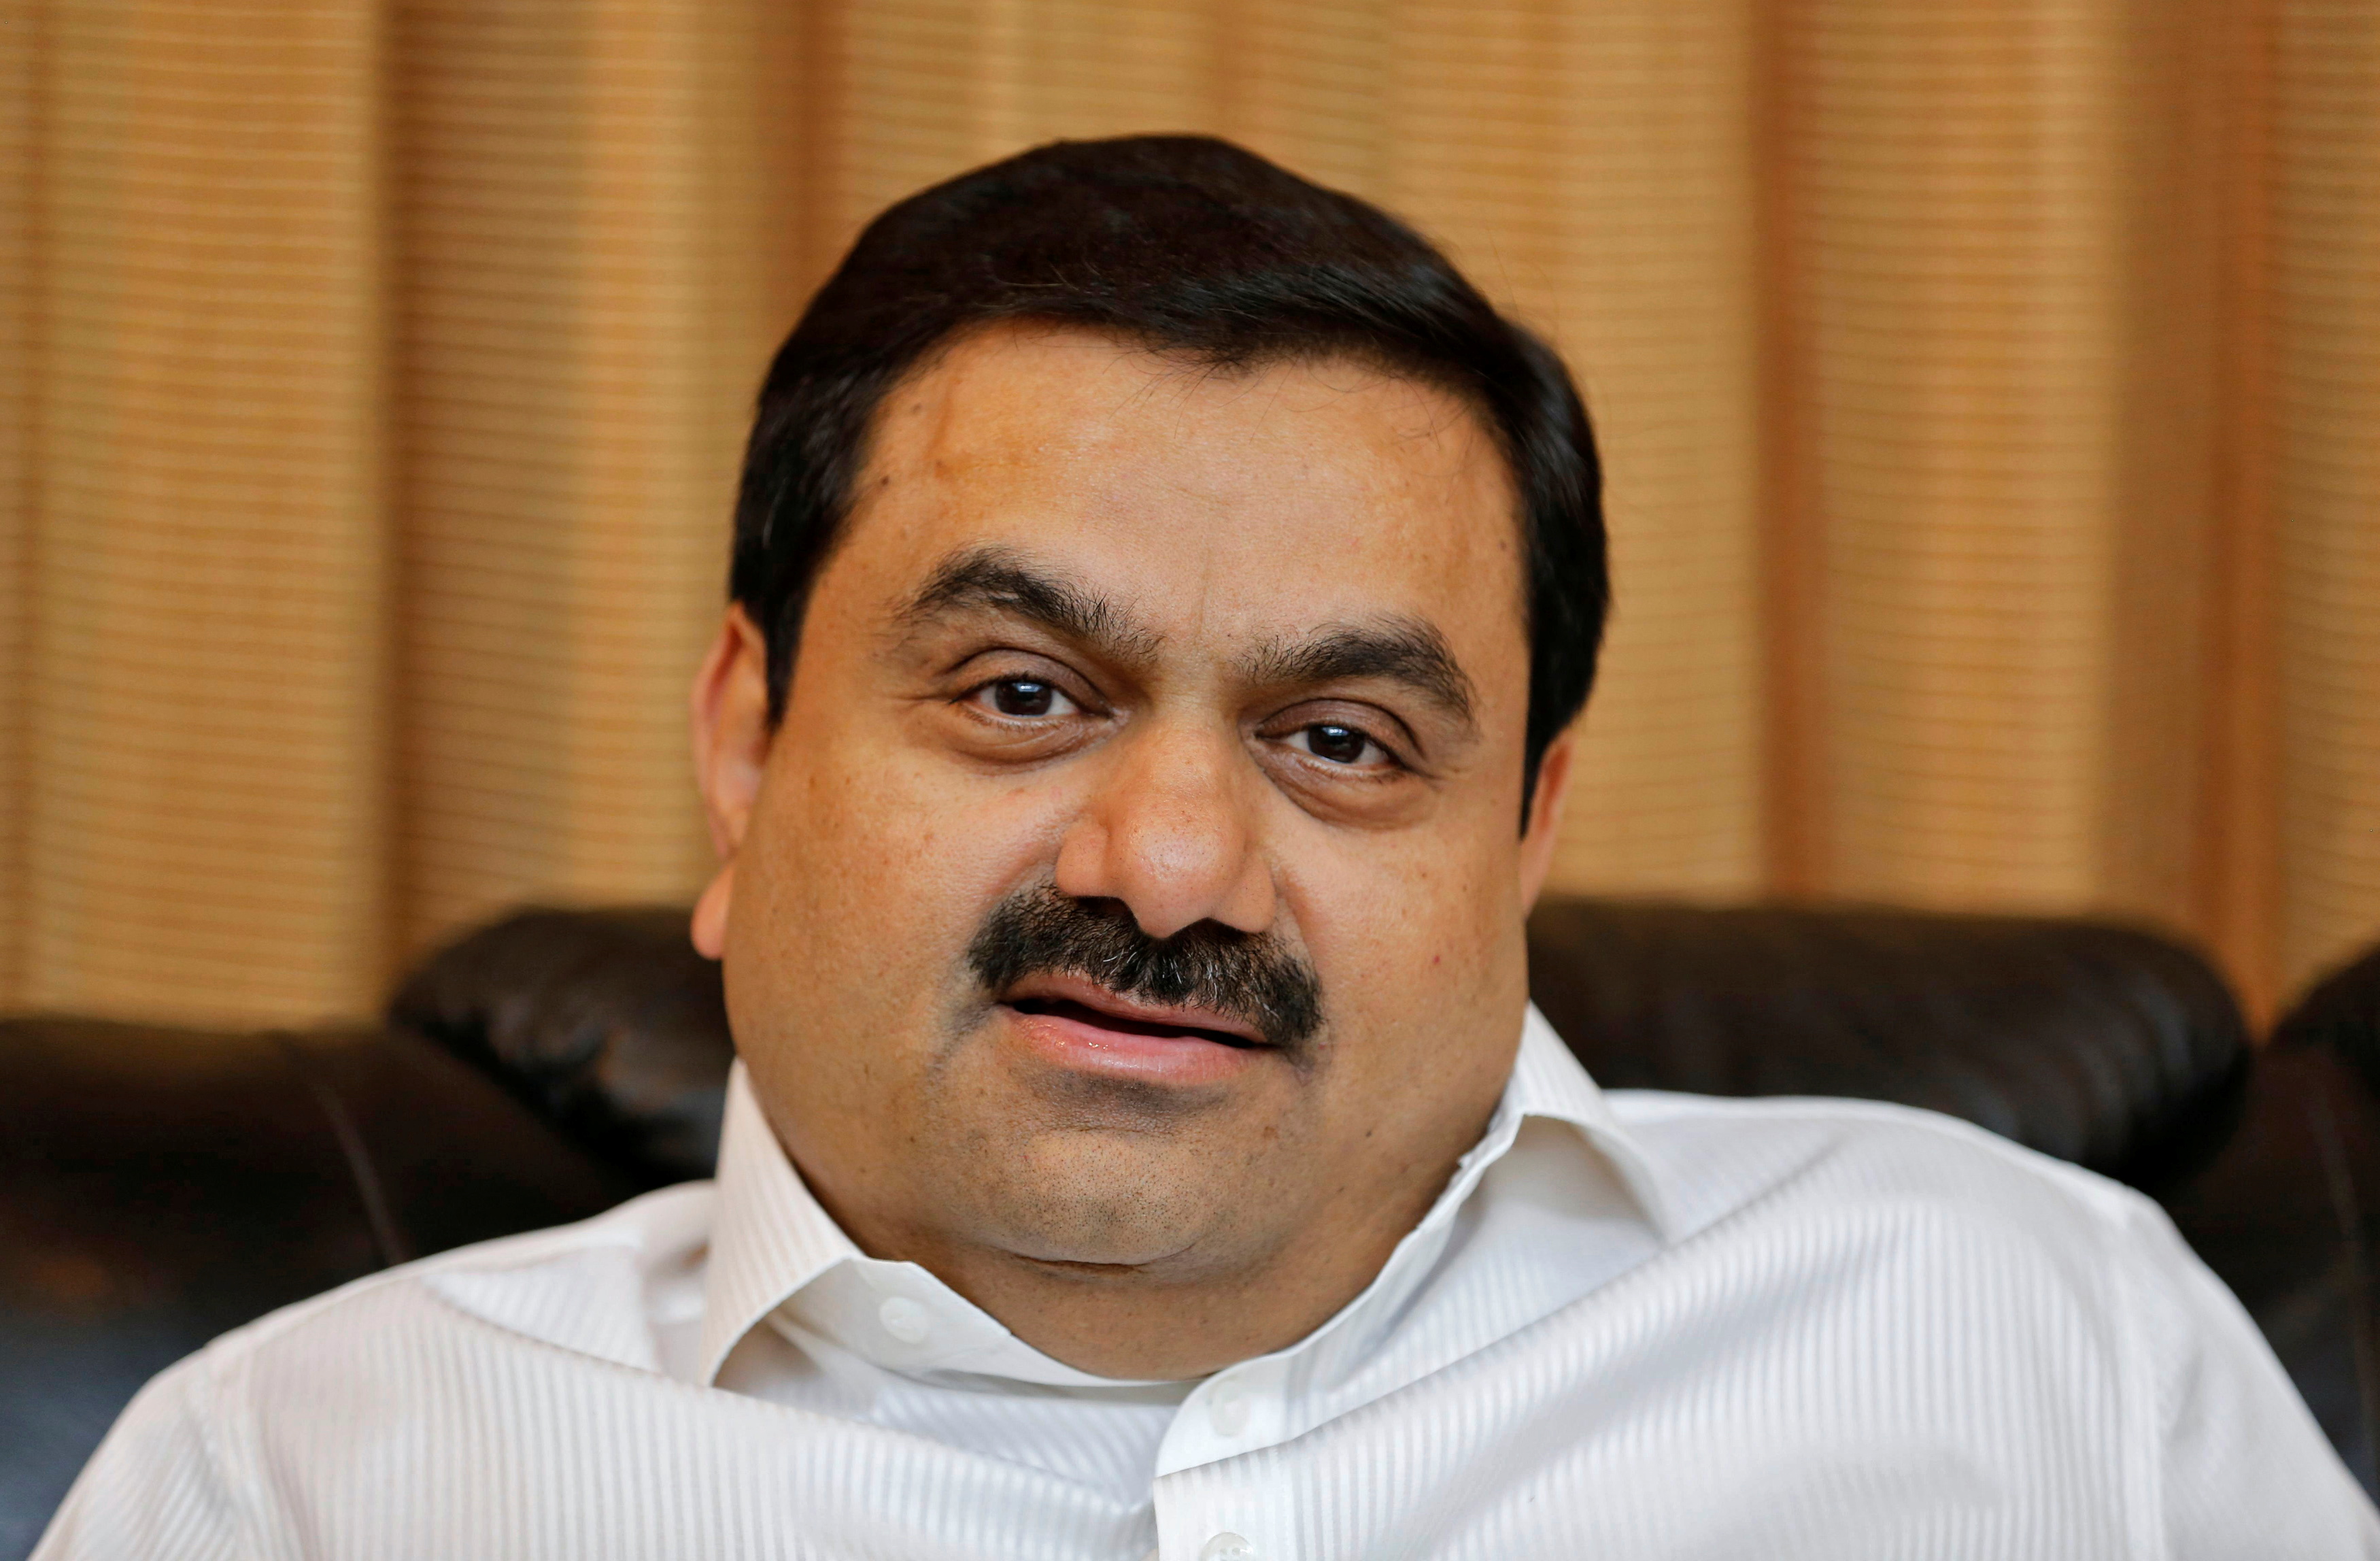 FILE PHOTO: Indian billionaire Gautam Adani speaks during an interview with Reuters at his office in the western Indian city of Ahmedabad April 2, 2014. REUTERS/Amit Dave/File Photo